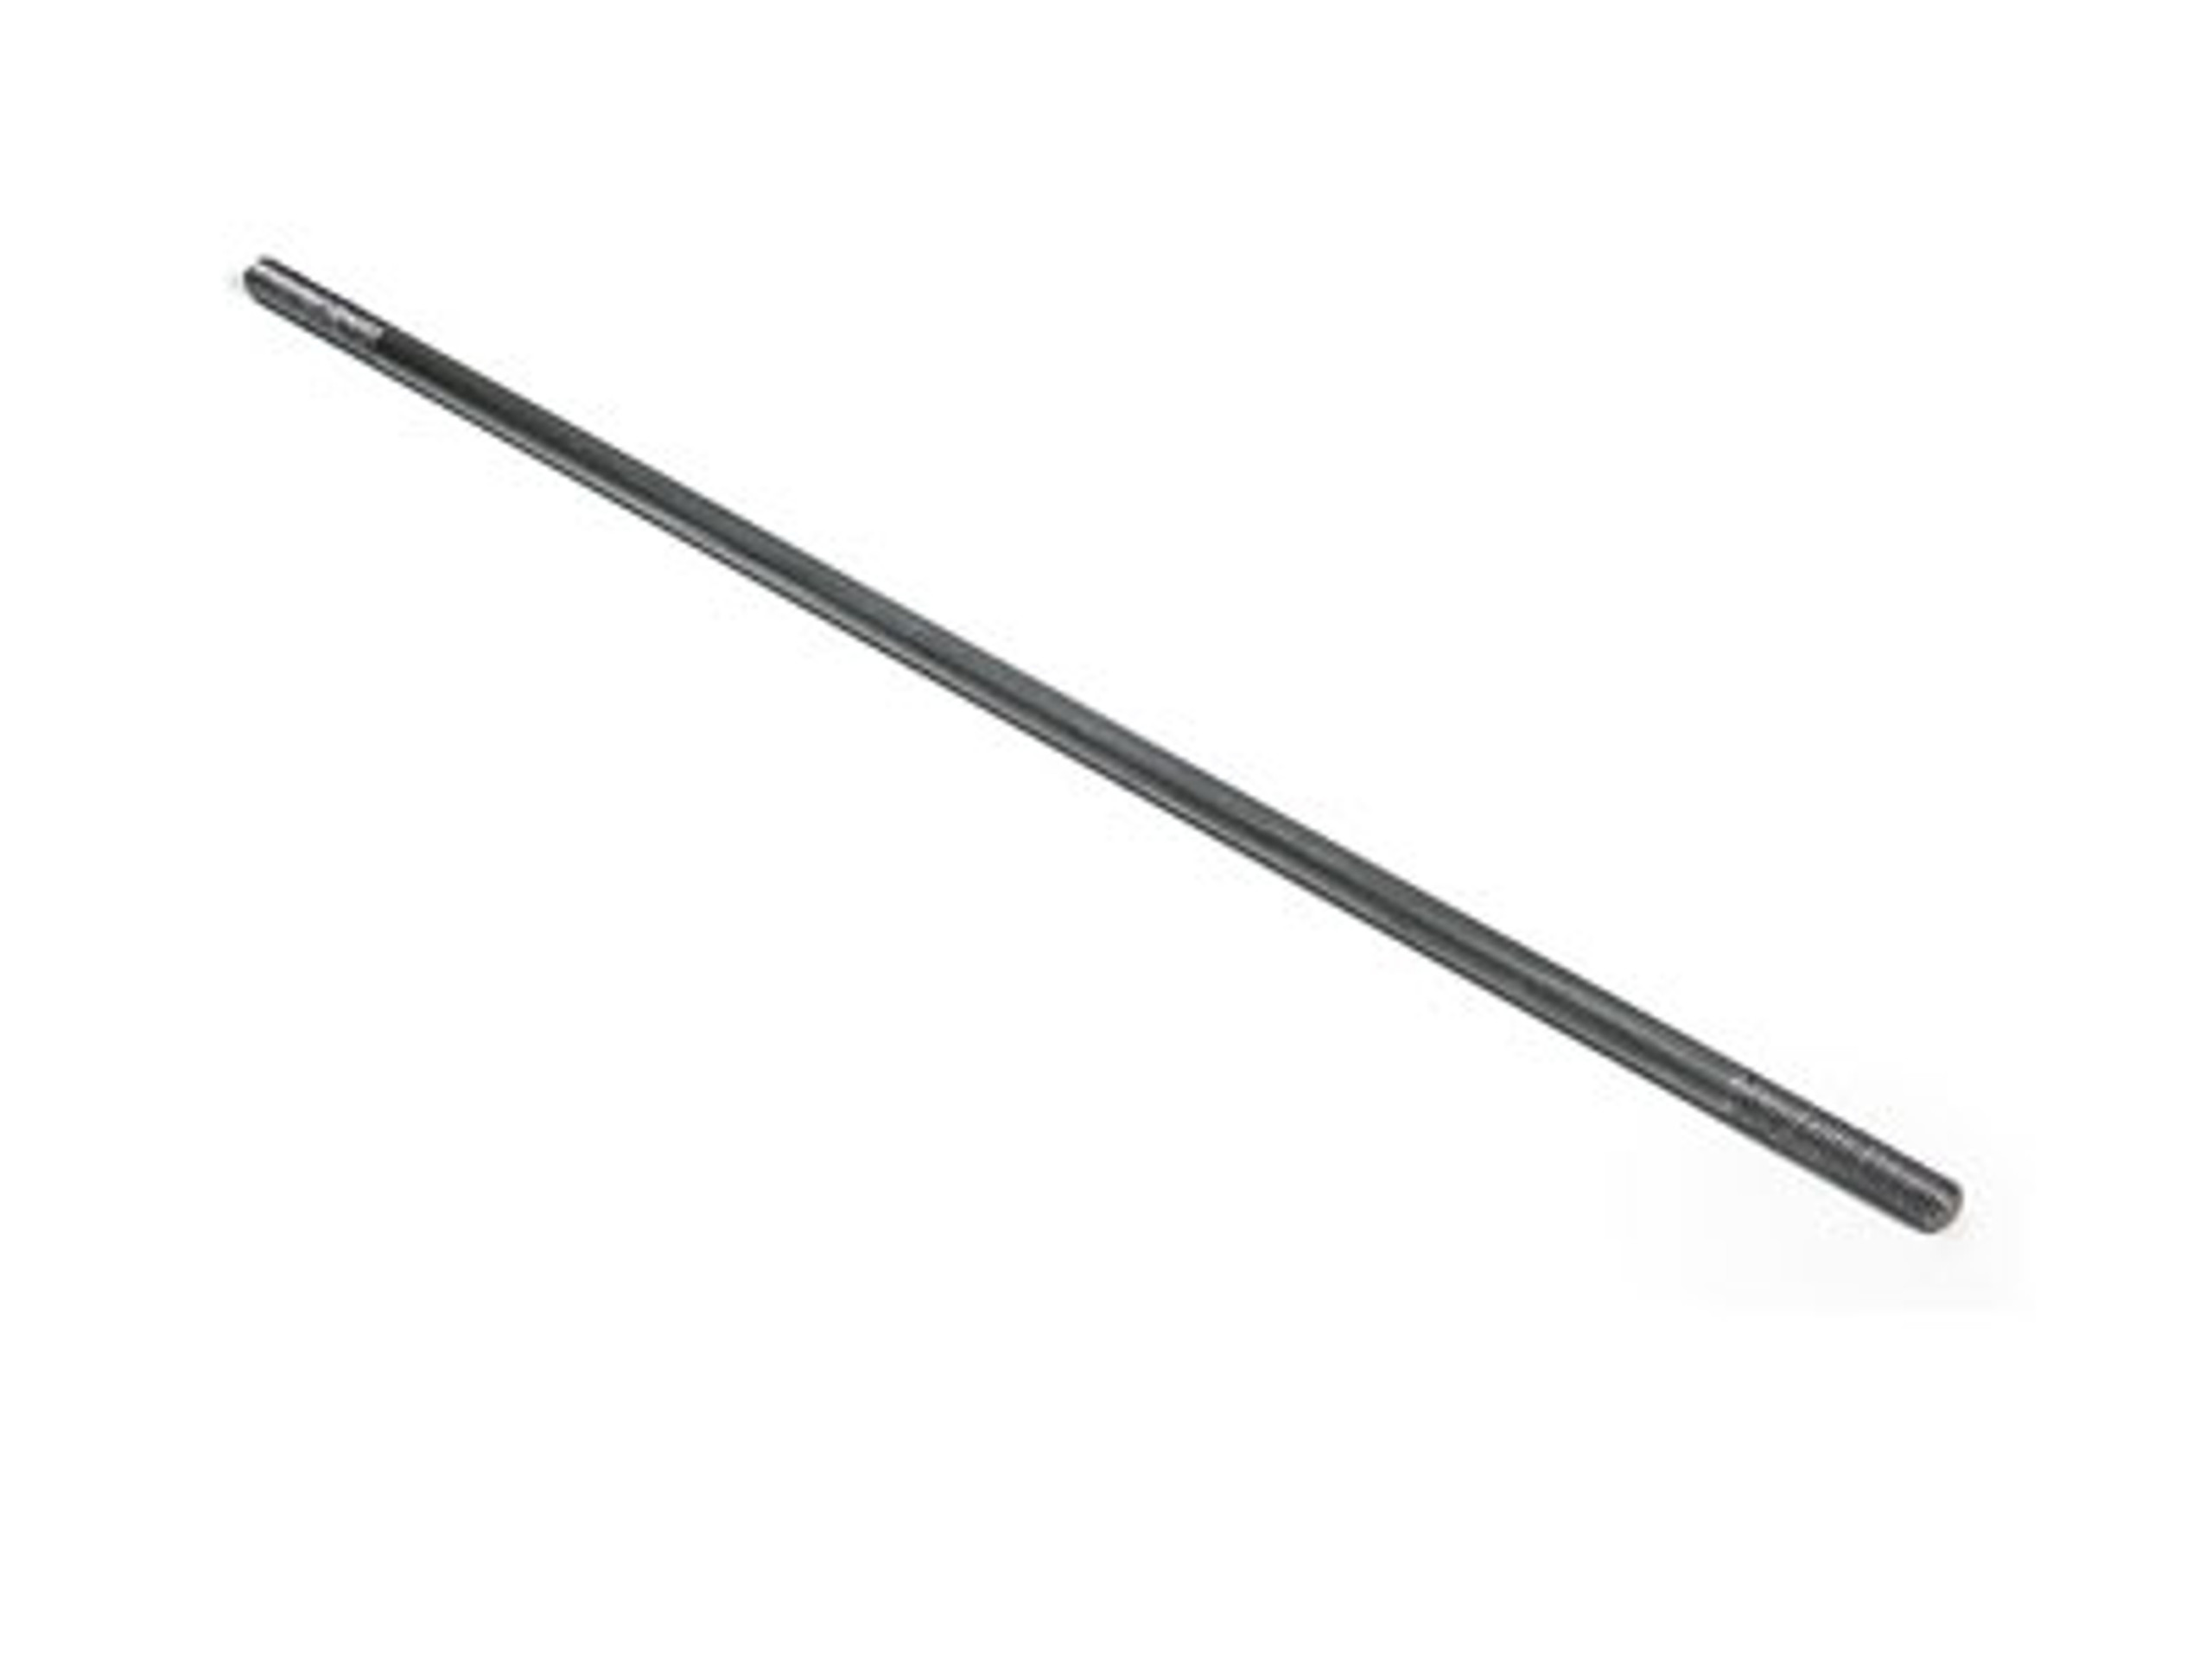 Cocking Rod, Attaches to Cocking Lever, Fits RWS 48, 52 & 54 - Airgun ...